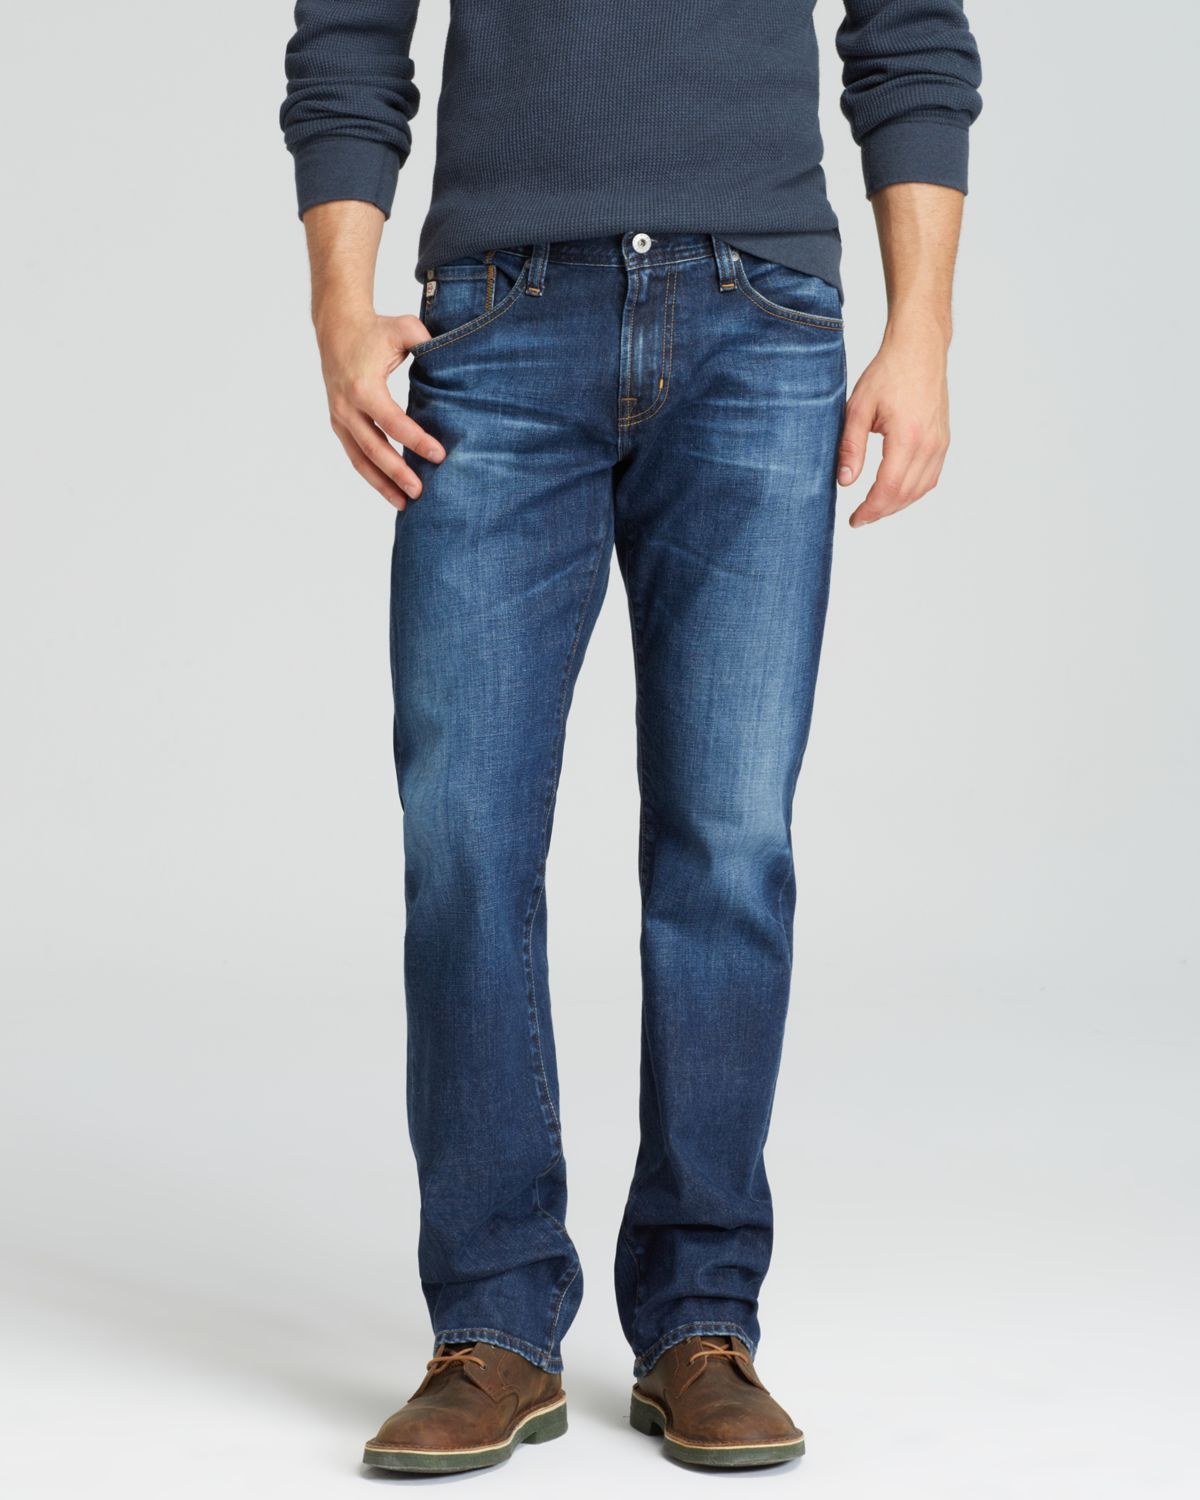 Ag adriano goldschmied Adriano Goldschmied Jeans - Protégé Straight Fit ...